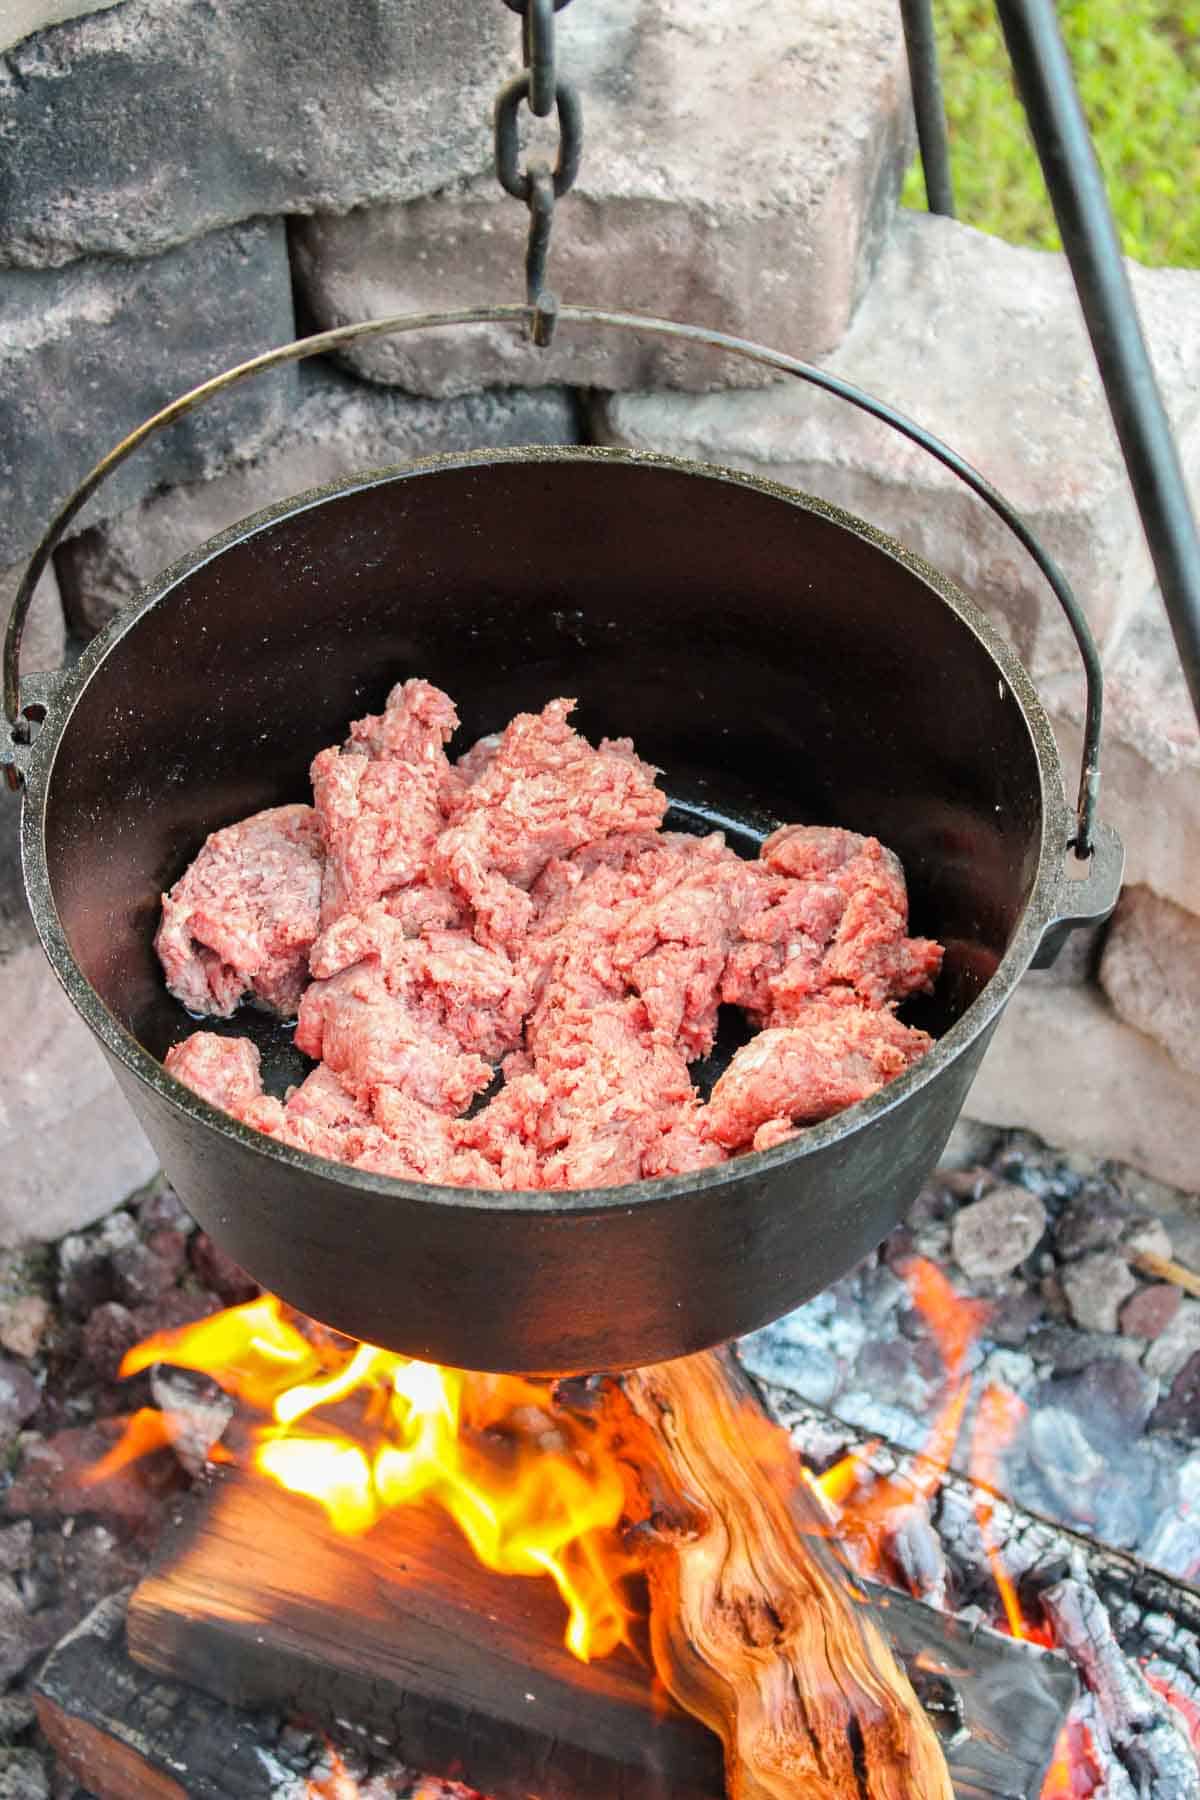 uncooked ground beef in a pot over a fire